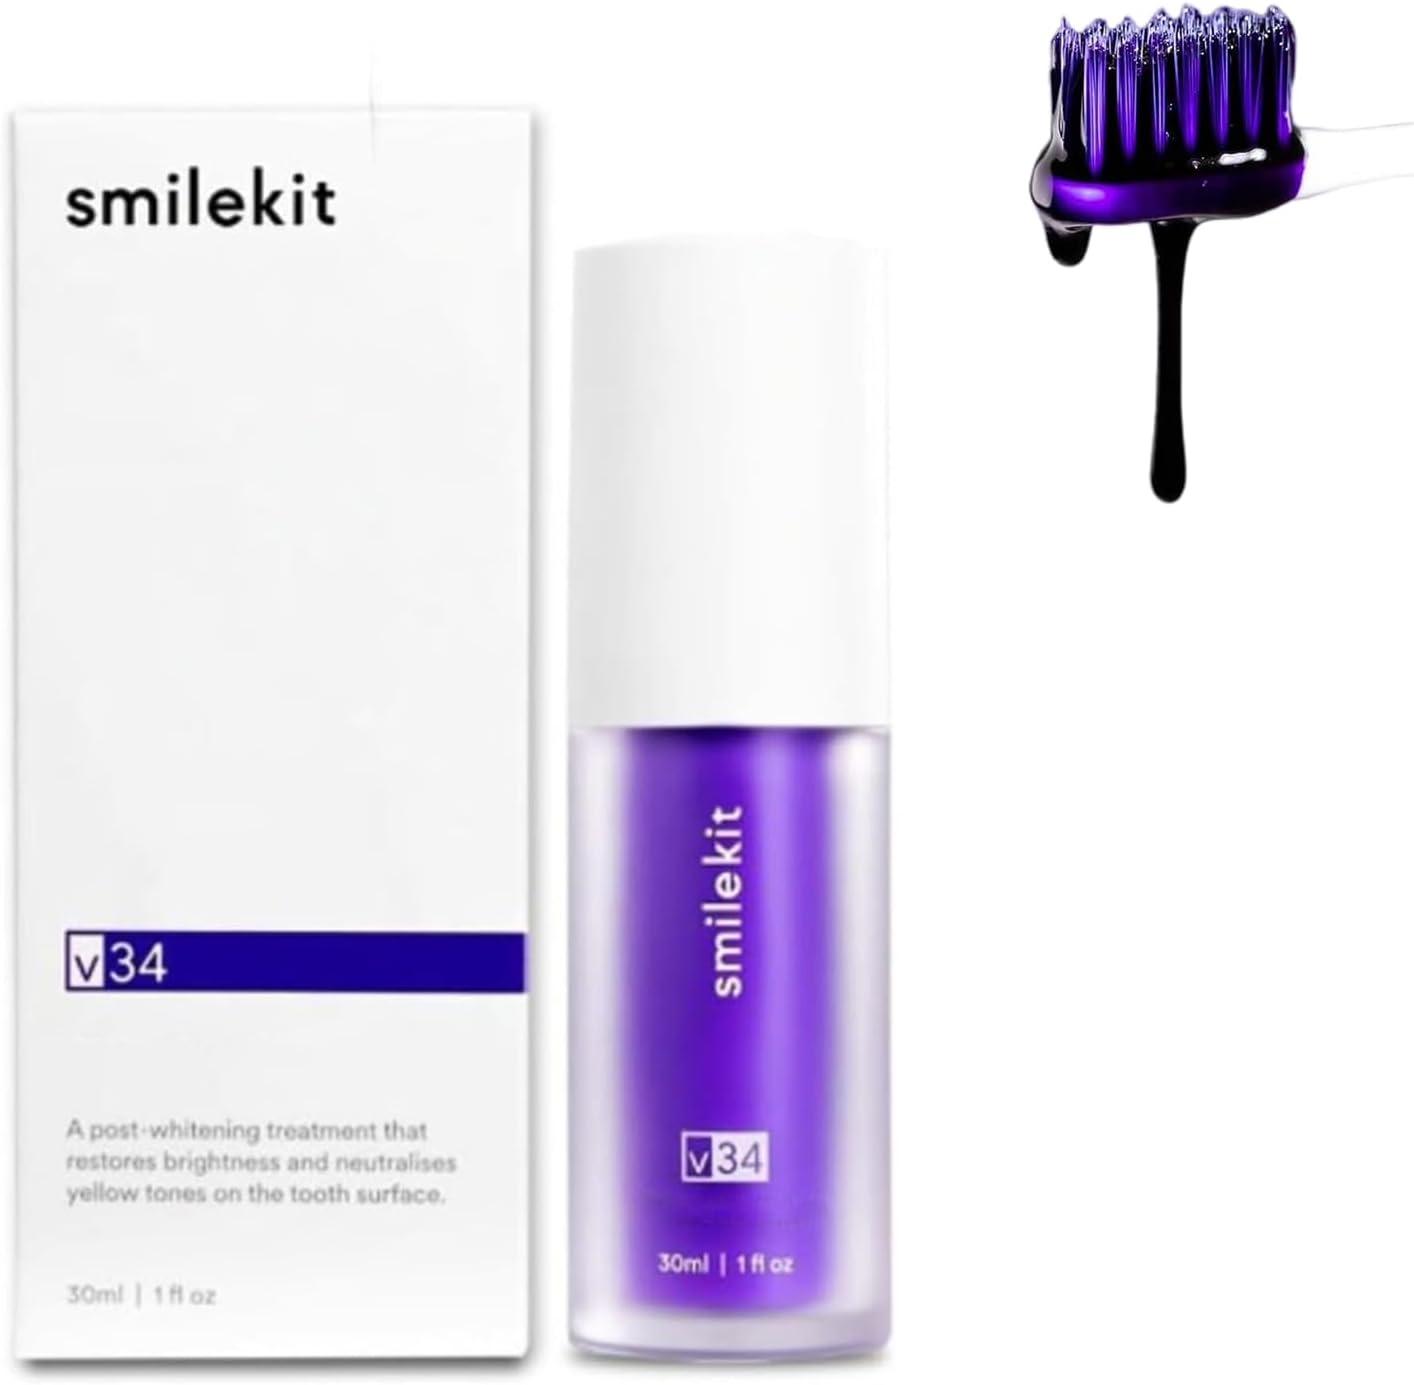 Smilekit Teeth Color Corrector Purple Teeth Whitening Toothpaste, Purple Toothpaste for Teeth Whitening Colour Corrector Stain Removal and Reduce Yellowing...